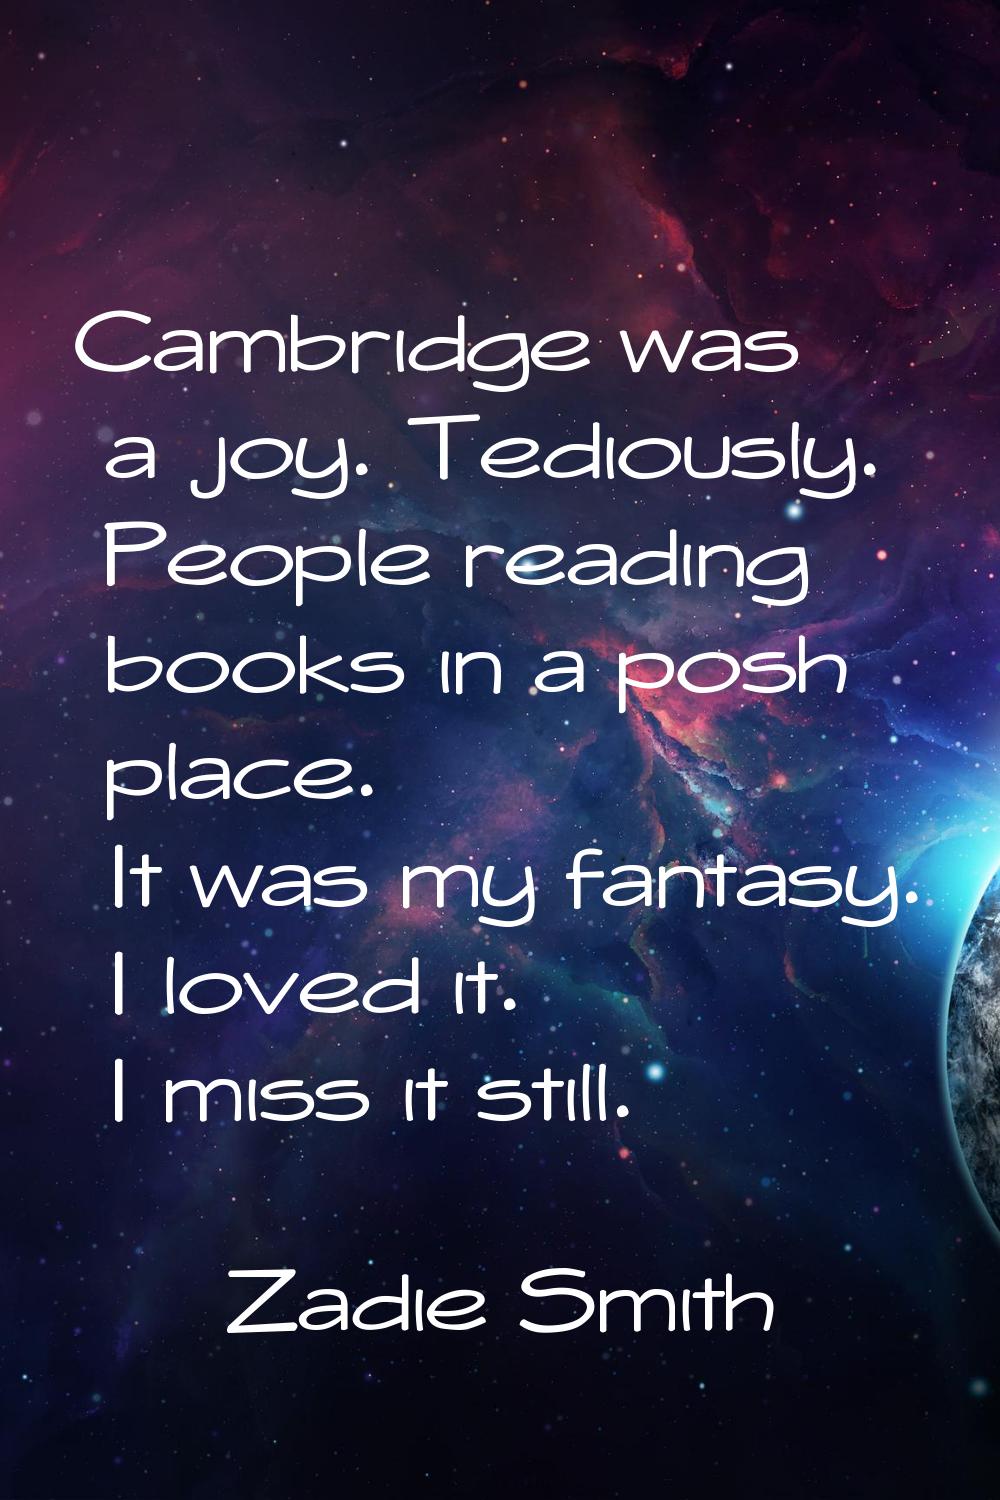 Cambridge was a joy. Tediously. People reading books in a posh place. It was my fantasy. I loved it